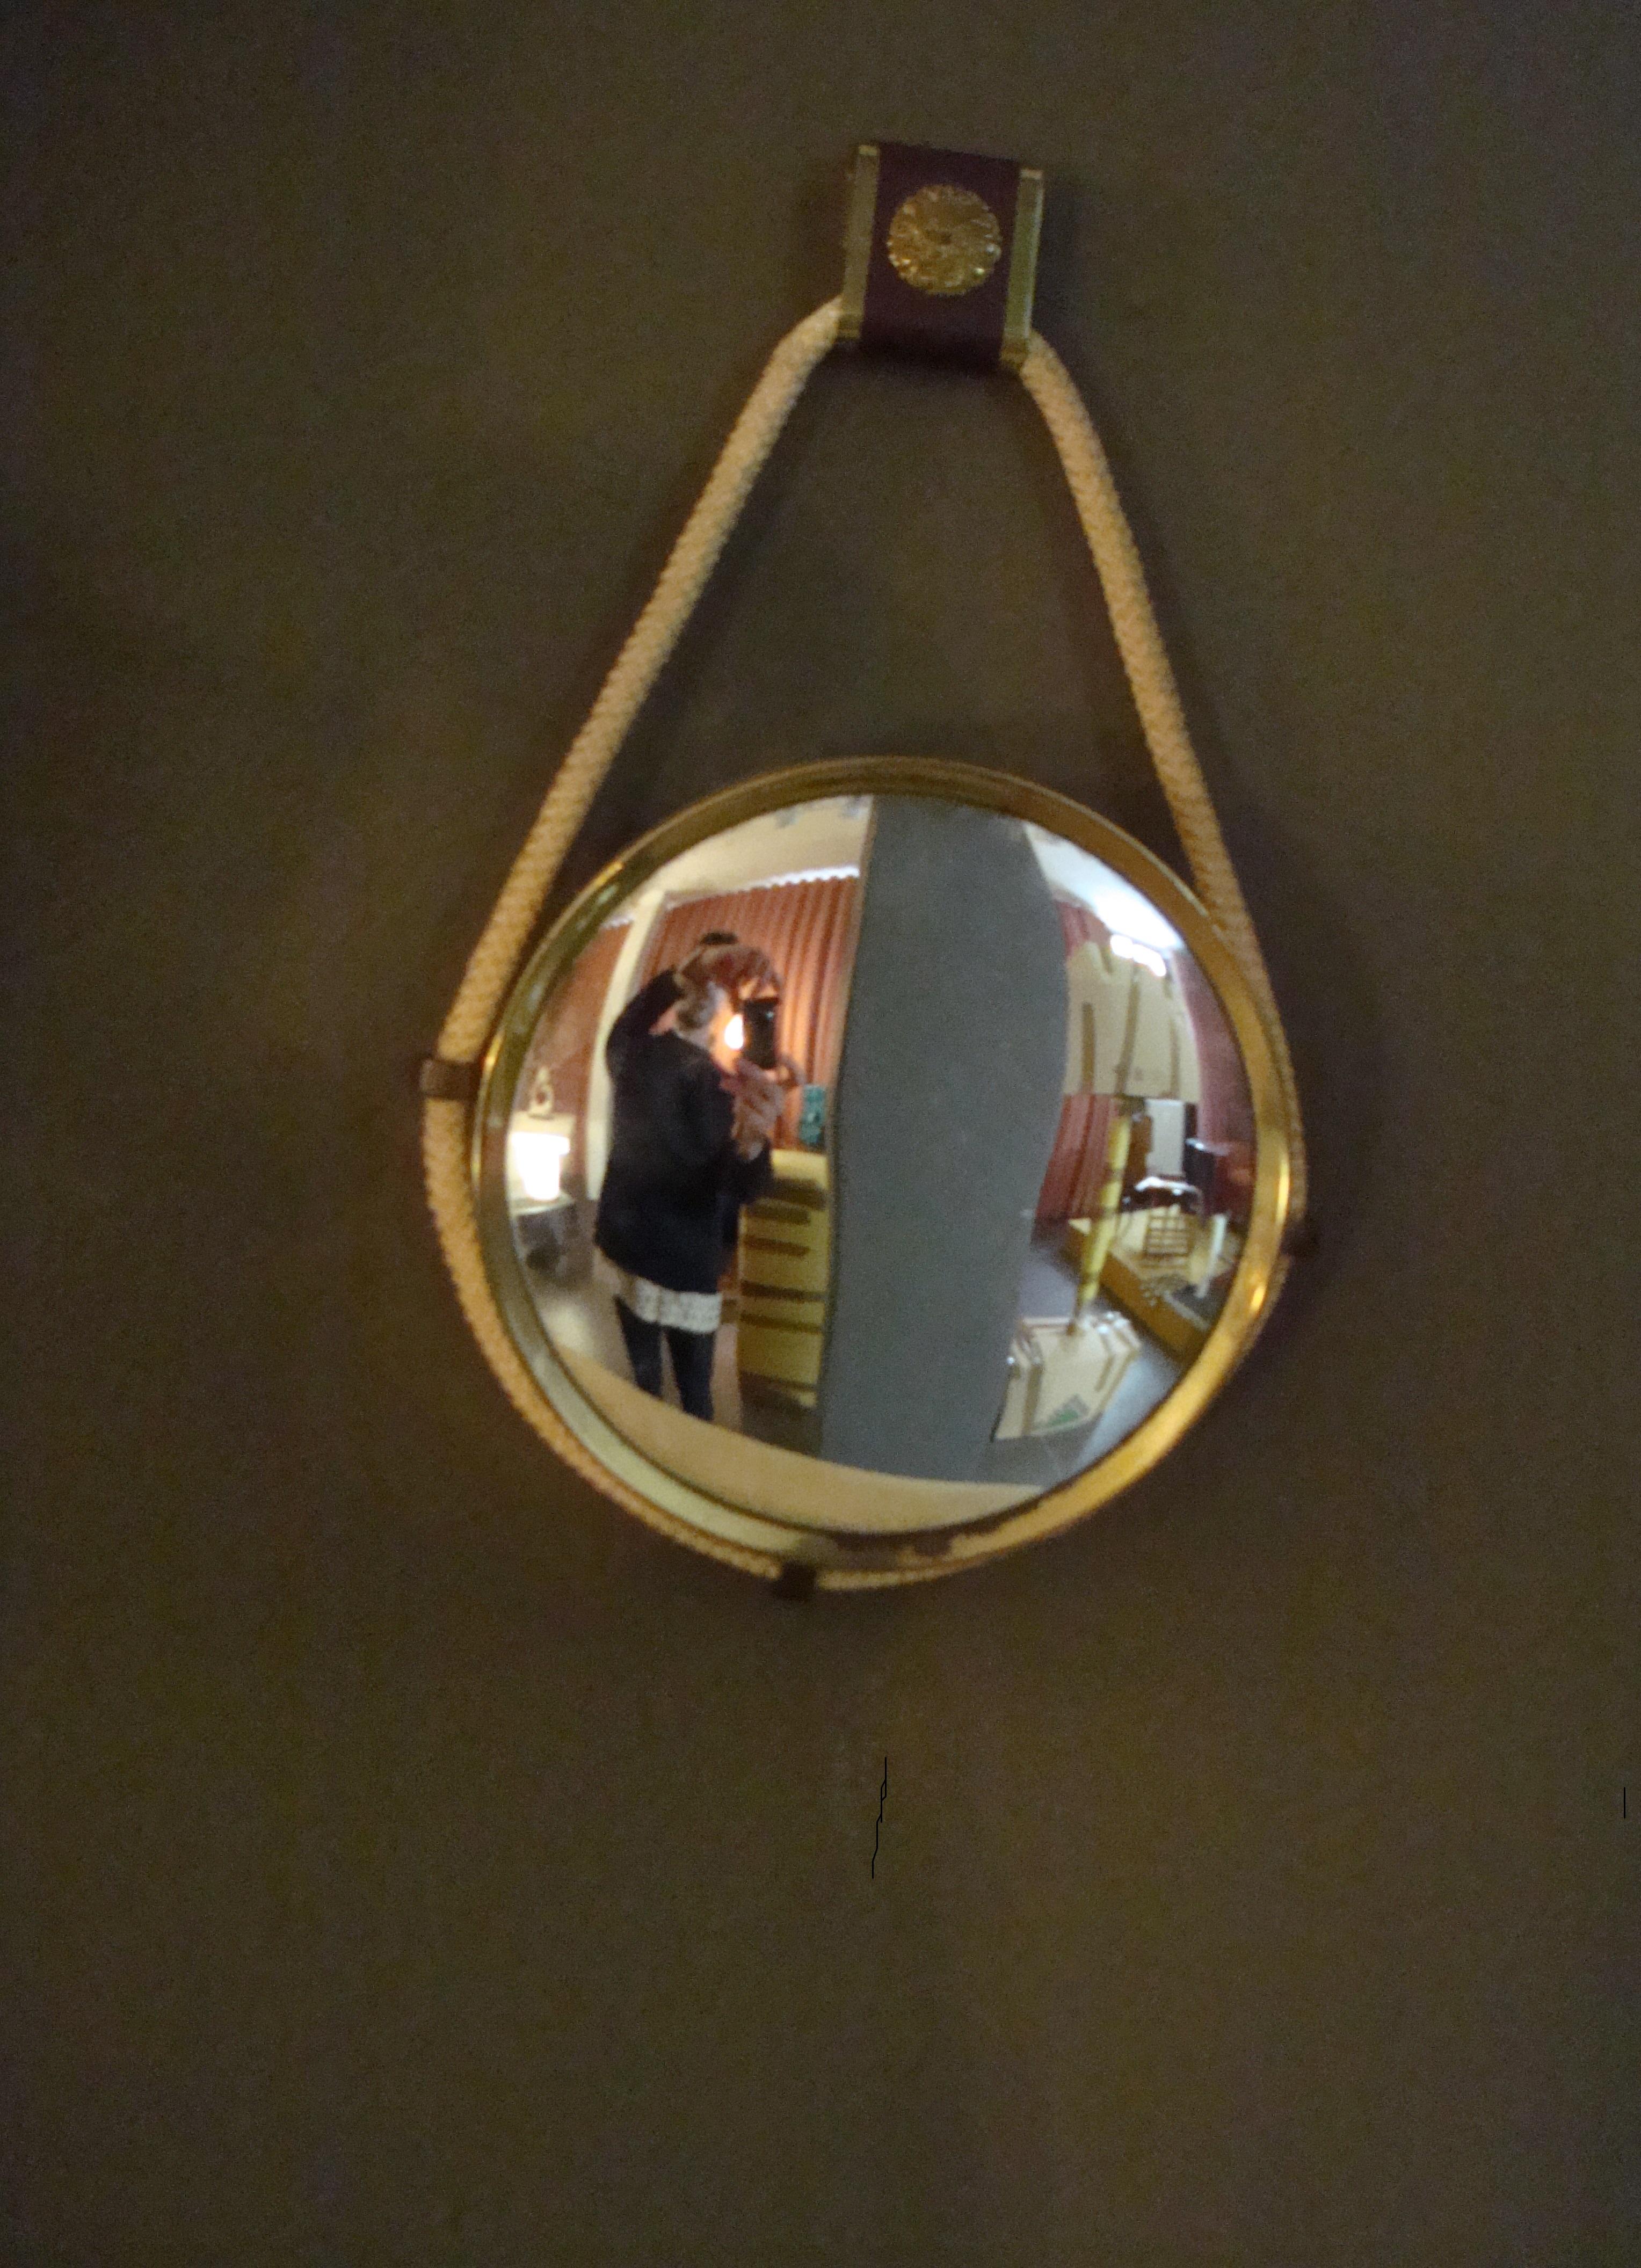 Mid-20th century Italian brass round convex mirror, circa 1960 mounted with a navale rope, with brass rings, the whole hung with a leather and brass support. Perfect for a marine-style interiors or a classic and modern home.